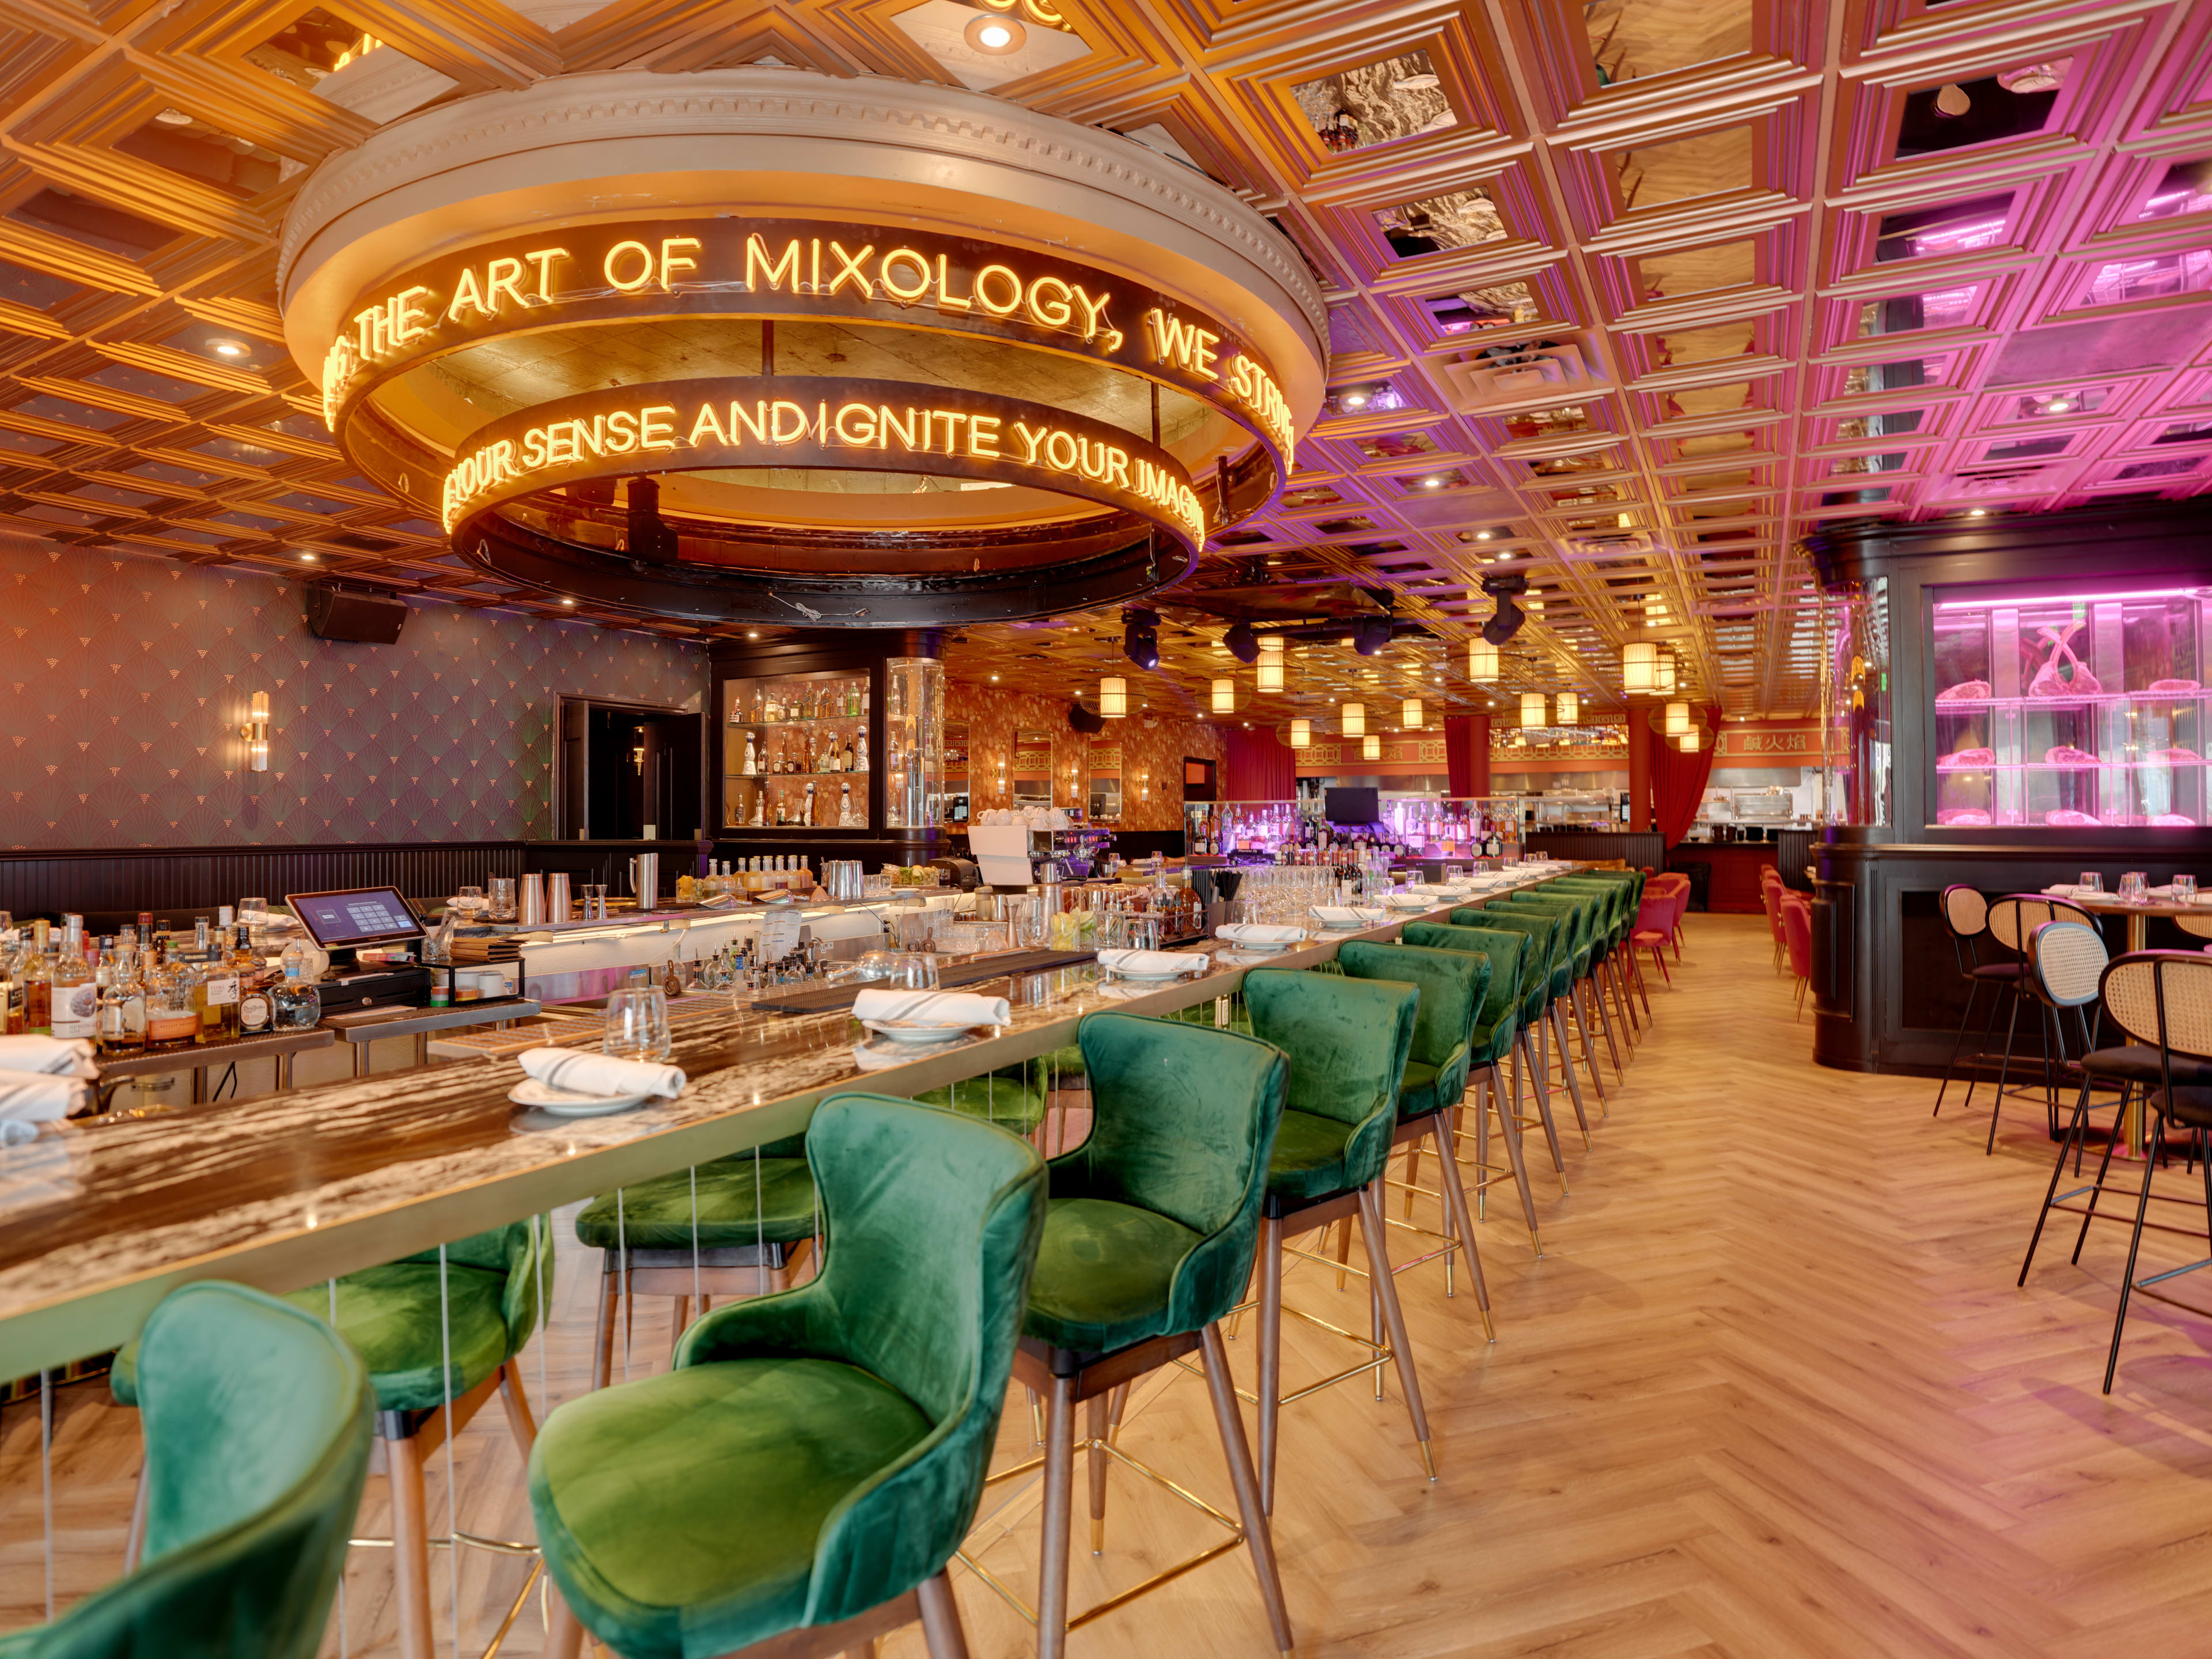 massive bar interior with neon signs and high ceilings